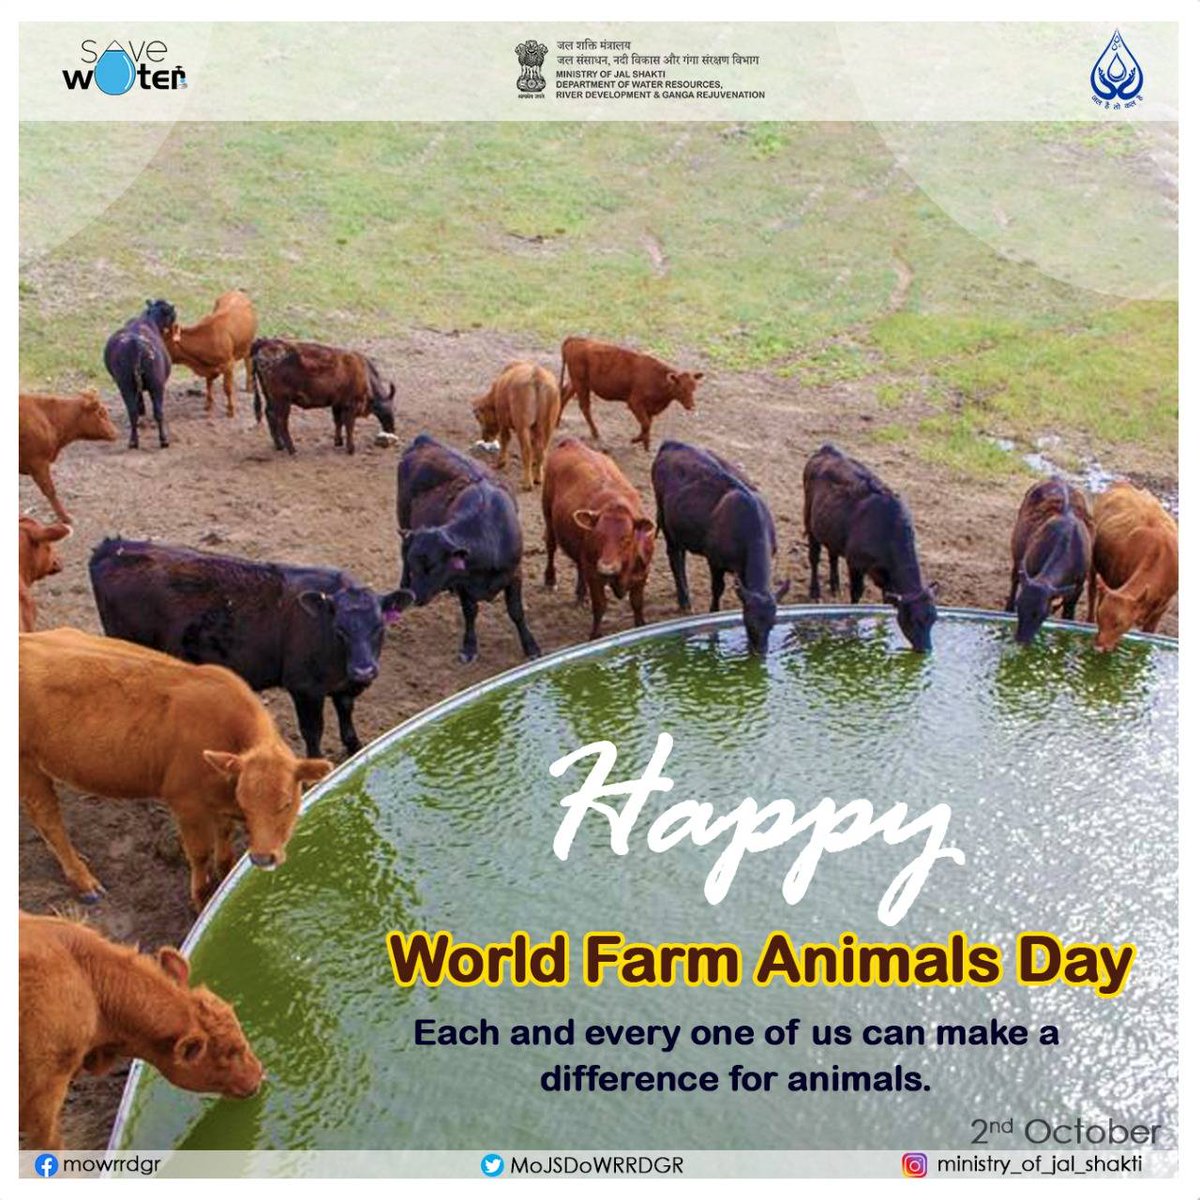 To make a difference in the lives of farm animals, rejuvenate the local water bodies in your area.
#WorldFarmAnimalsDay #FarmAnimal #Animal #AnimalDay #FarmAnimalsDay